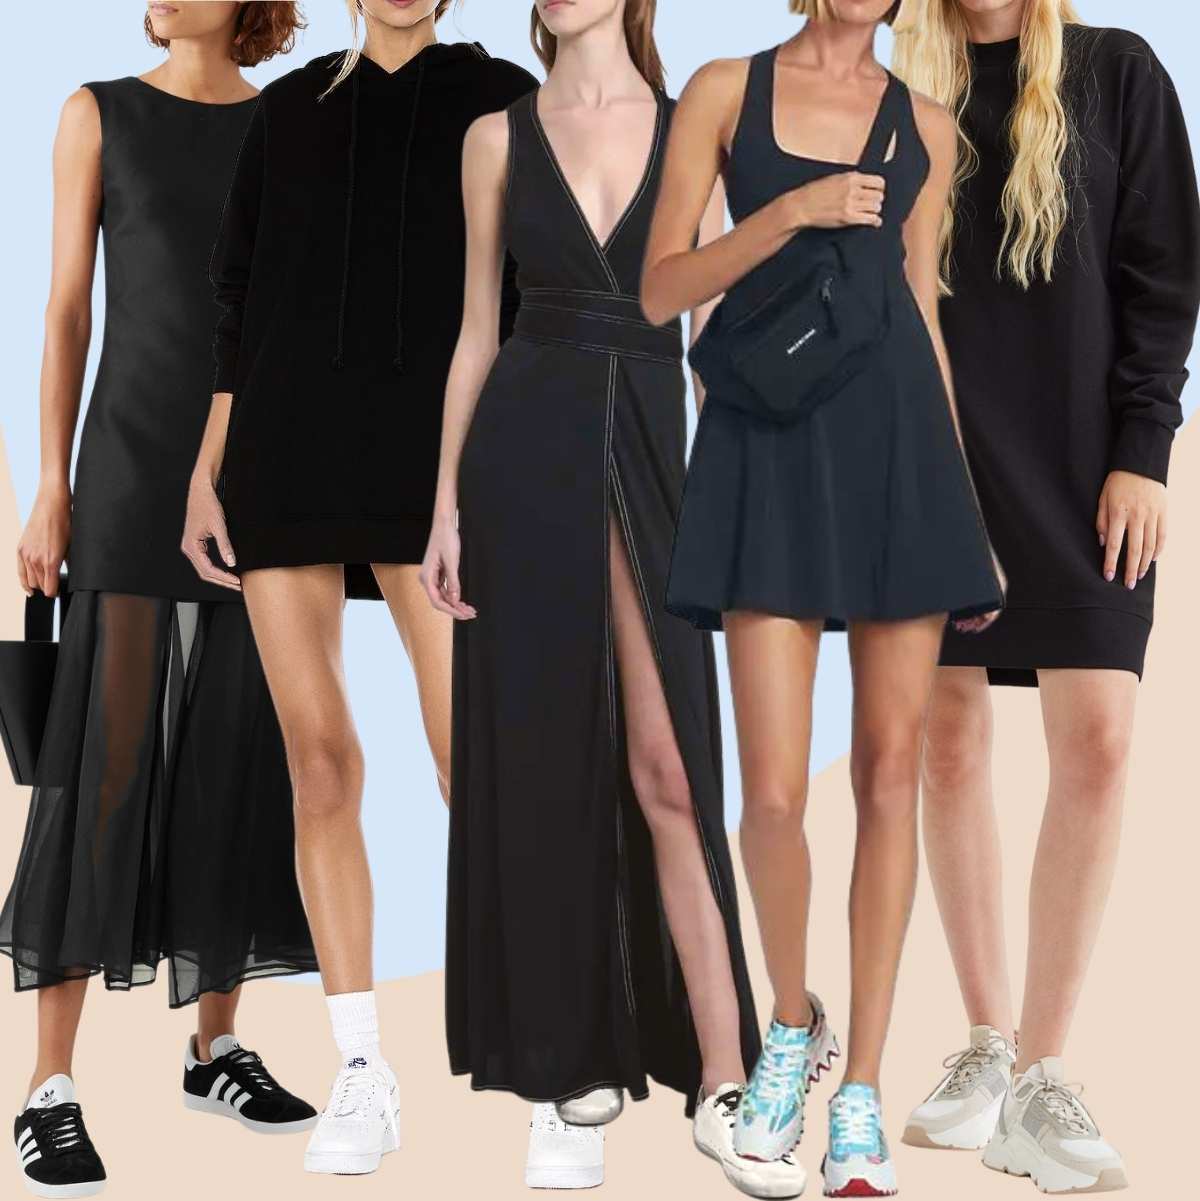 Collage of 5 women wearing different black dresses with sneakers outfits.